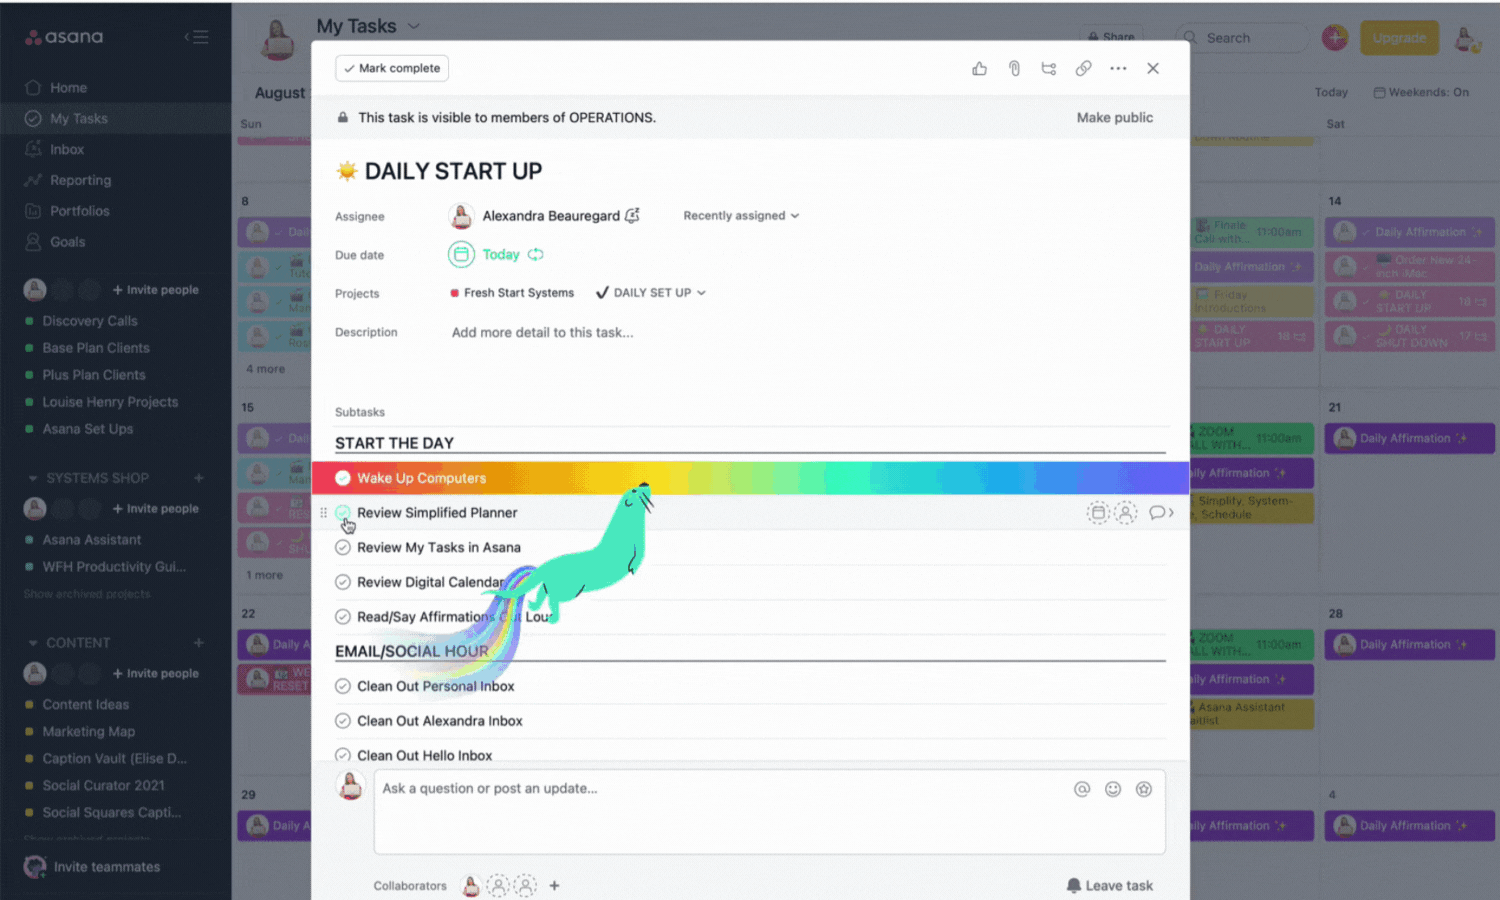 Gif of the rainbows and little animals that shoot across your screen when checking tasks off as complete in Asana